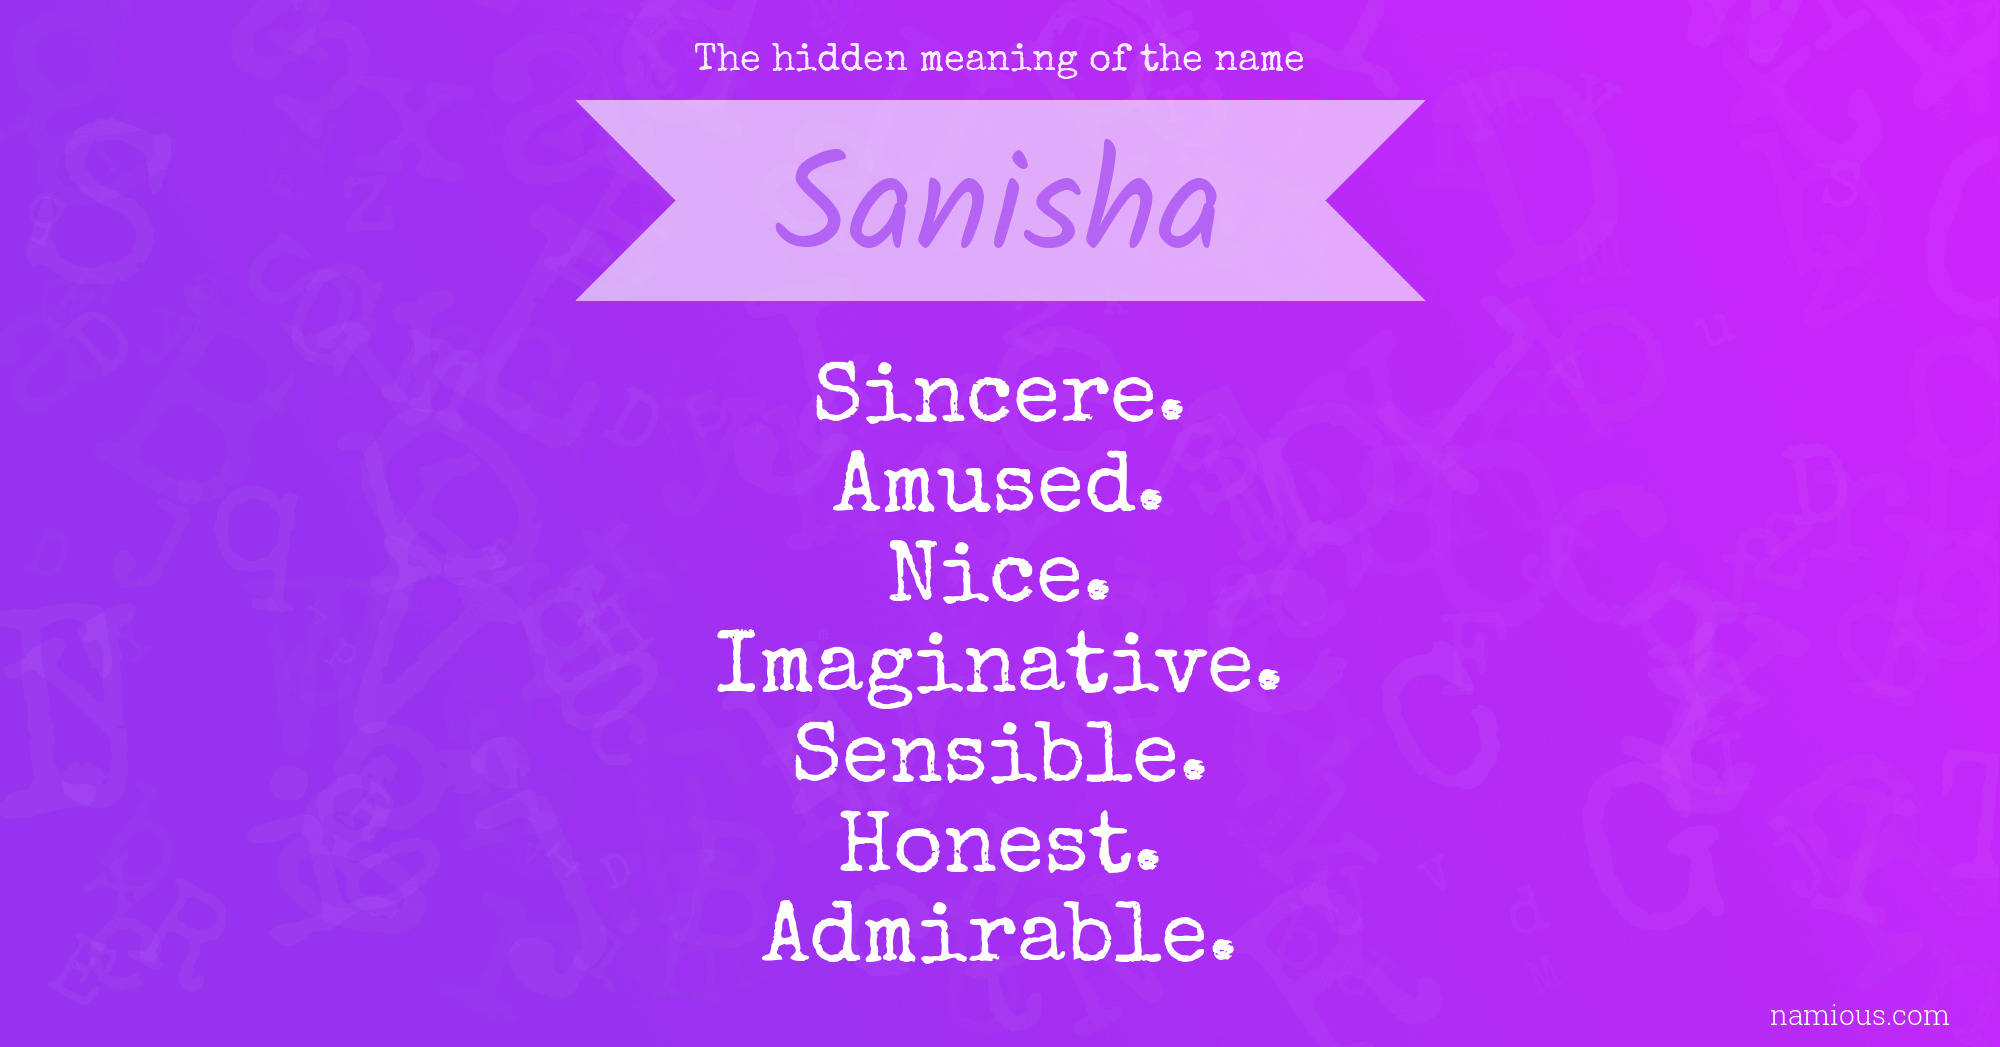 The hidden meaning of the name Sanisha